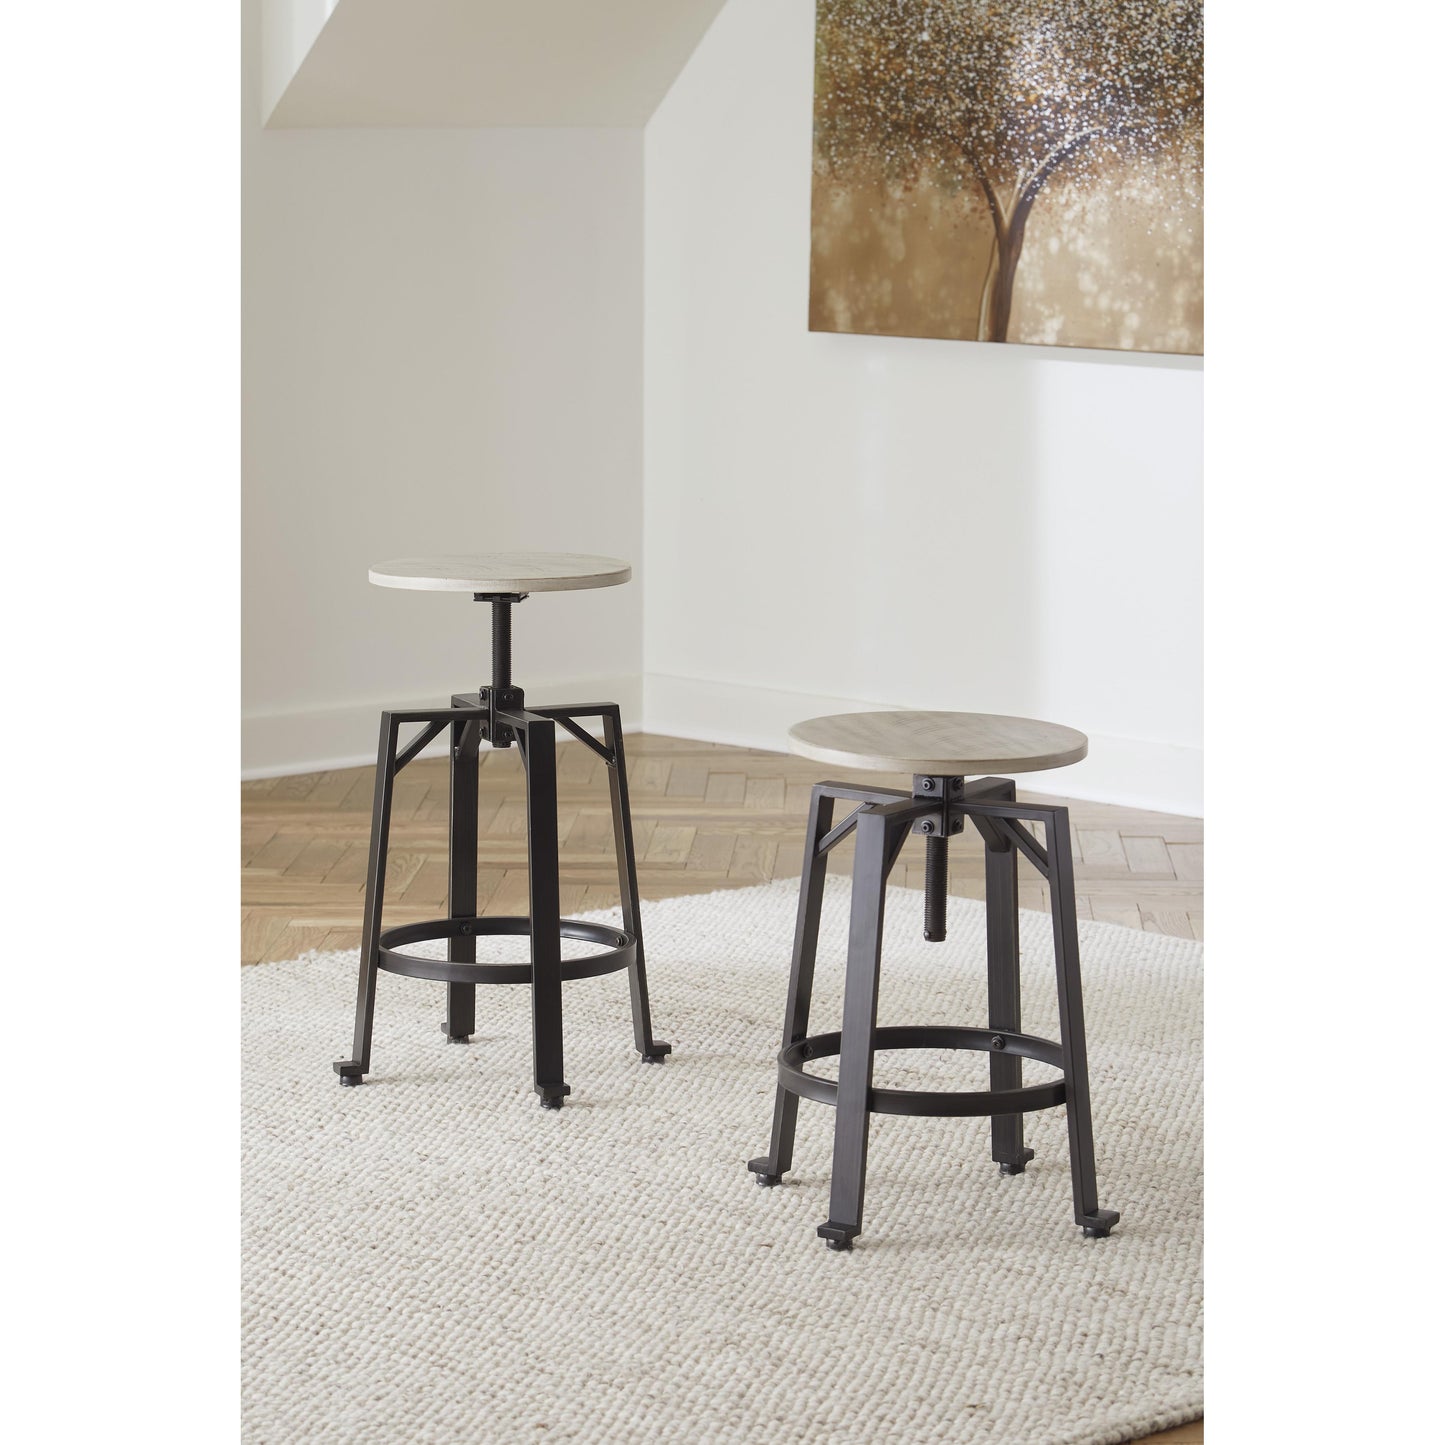 Signature Design by Ashley Karisslyn Adjustable Height Stool D336-024 IMAGE 3